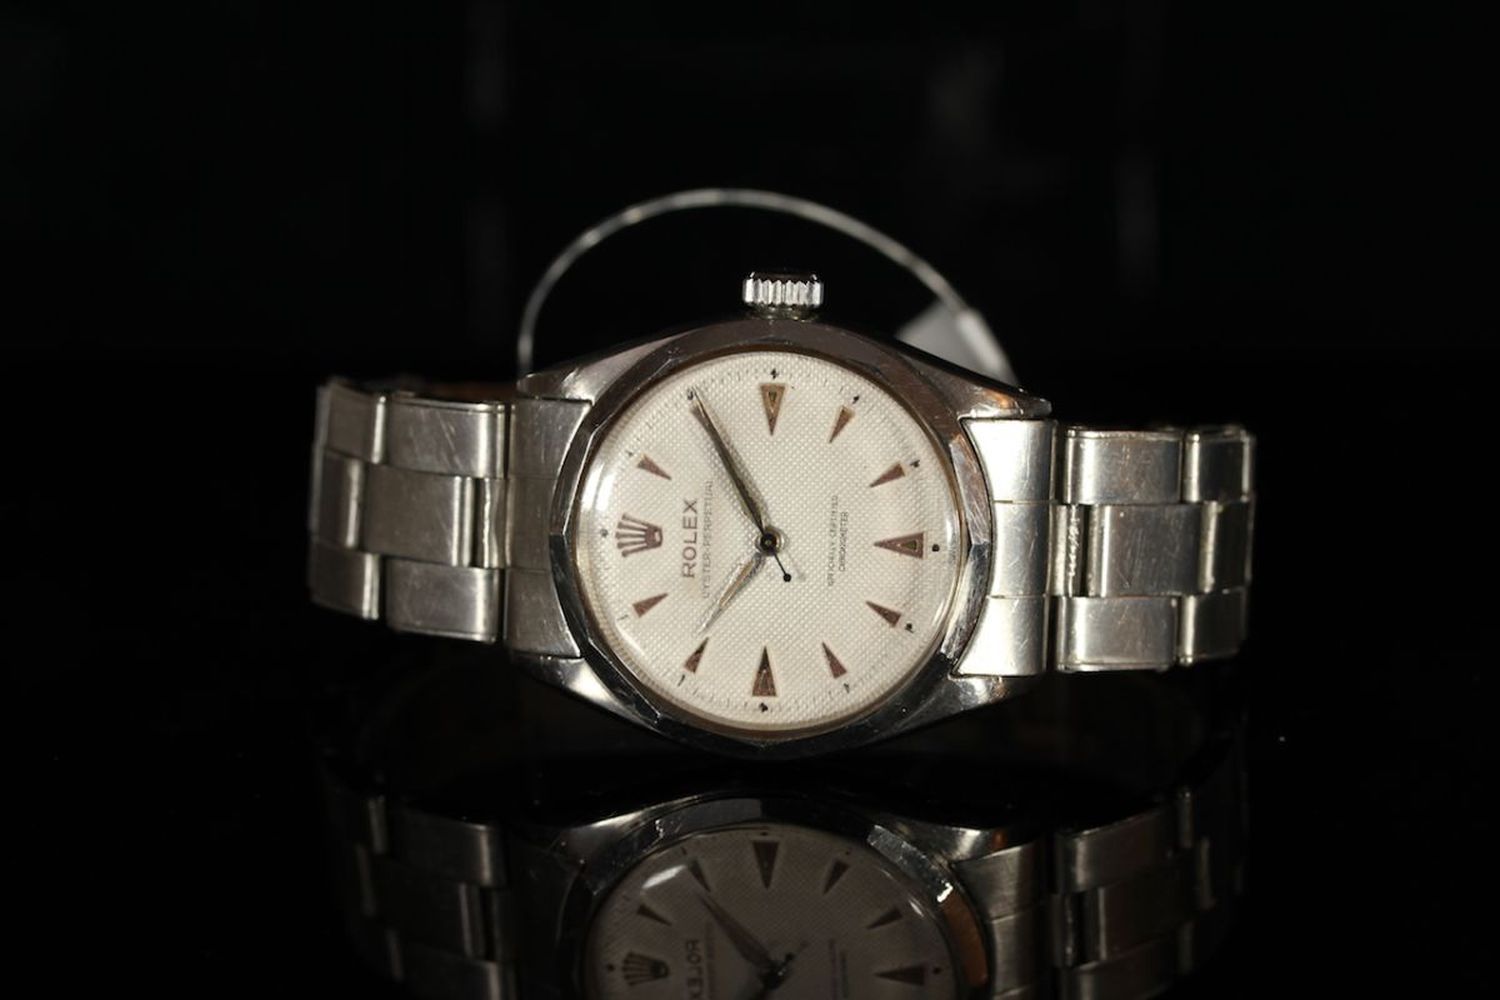 GENTLEMENS ROLEX SEMI BUBBLE BACK WRISTWATCH, circular honeycomb dial with arrow hour markers,